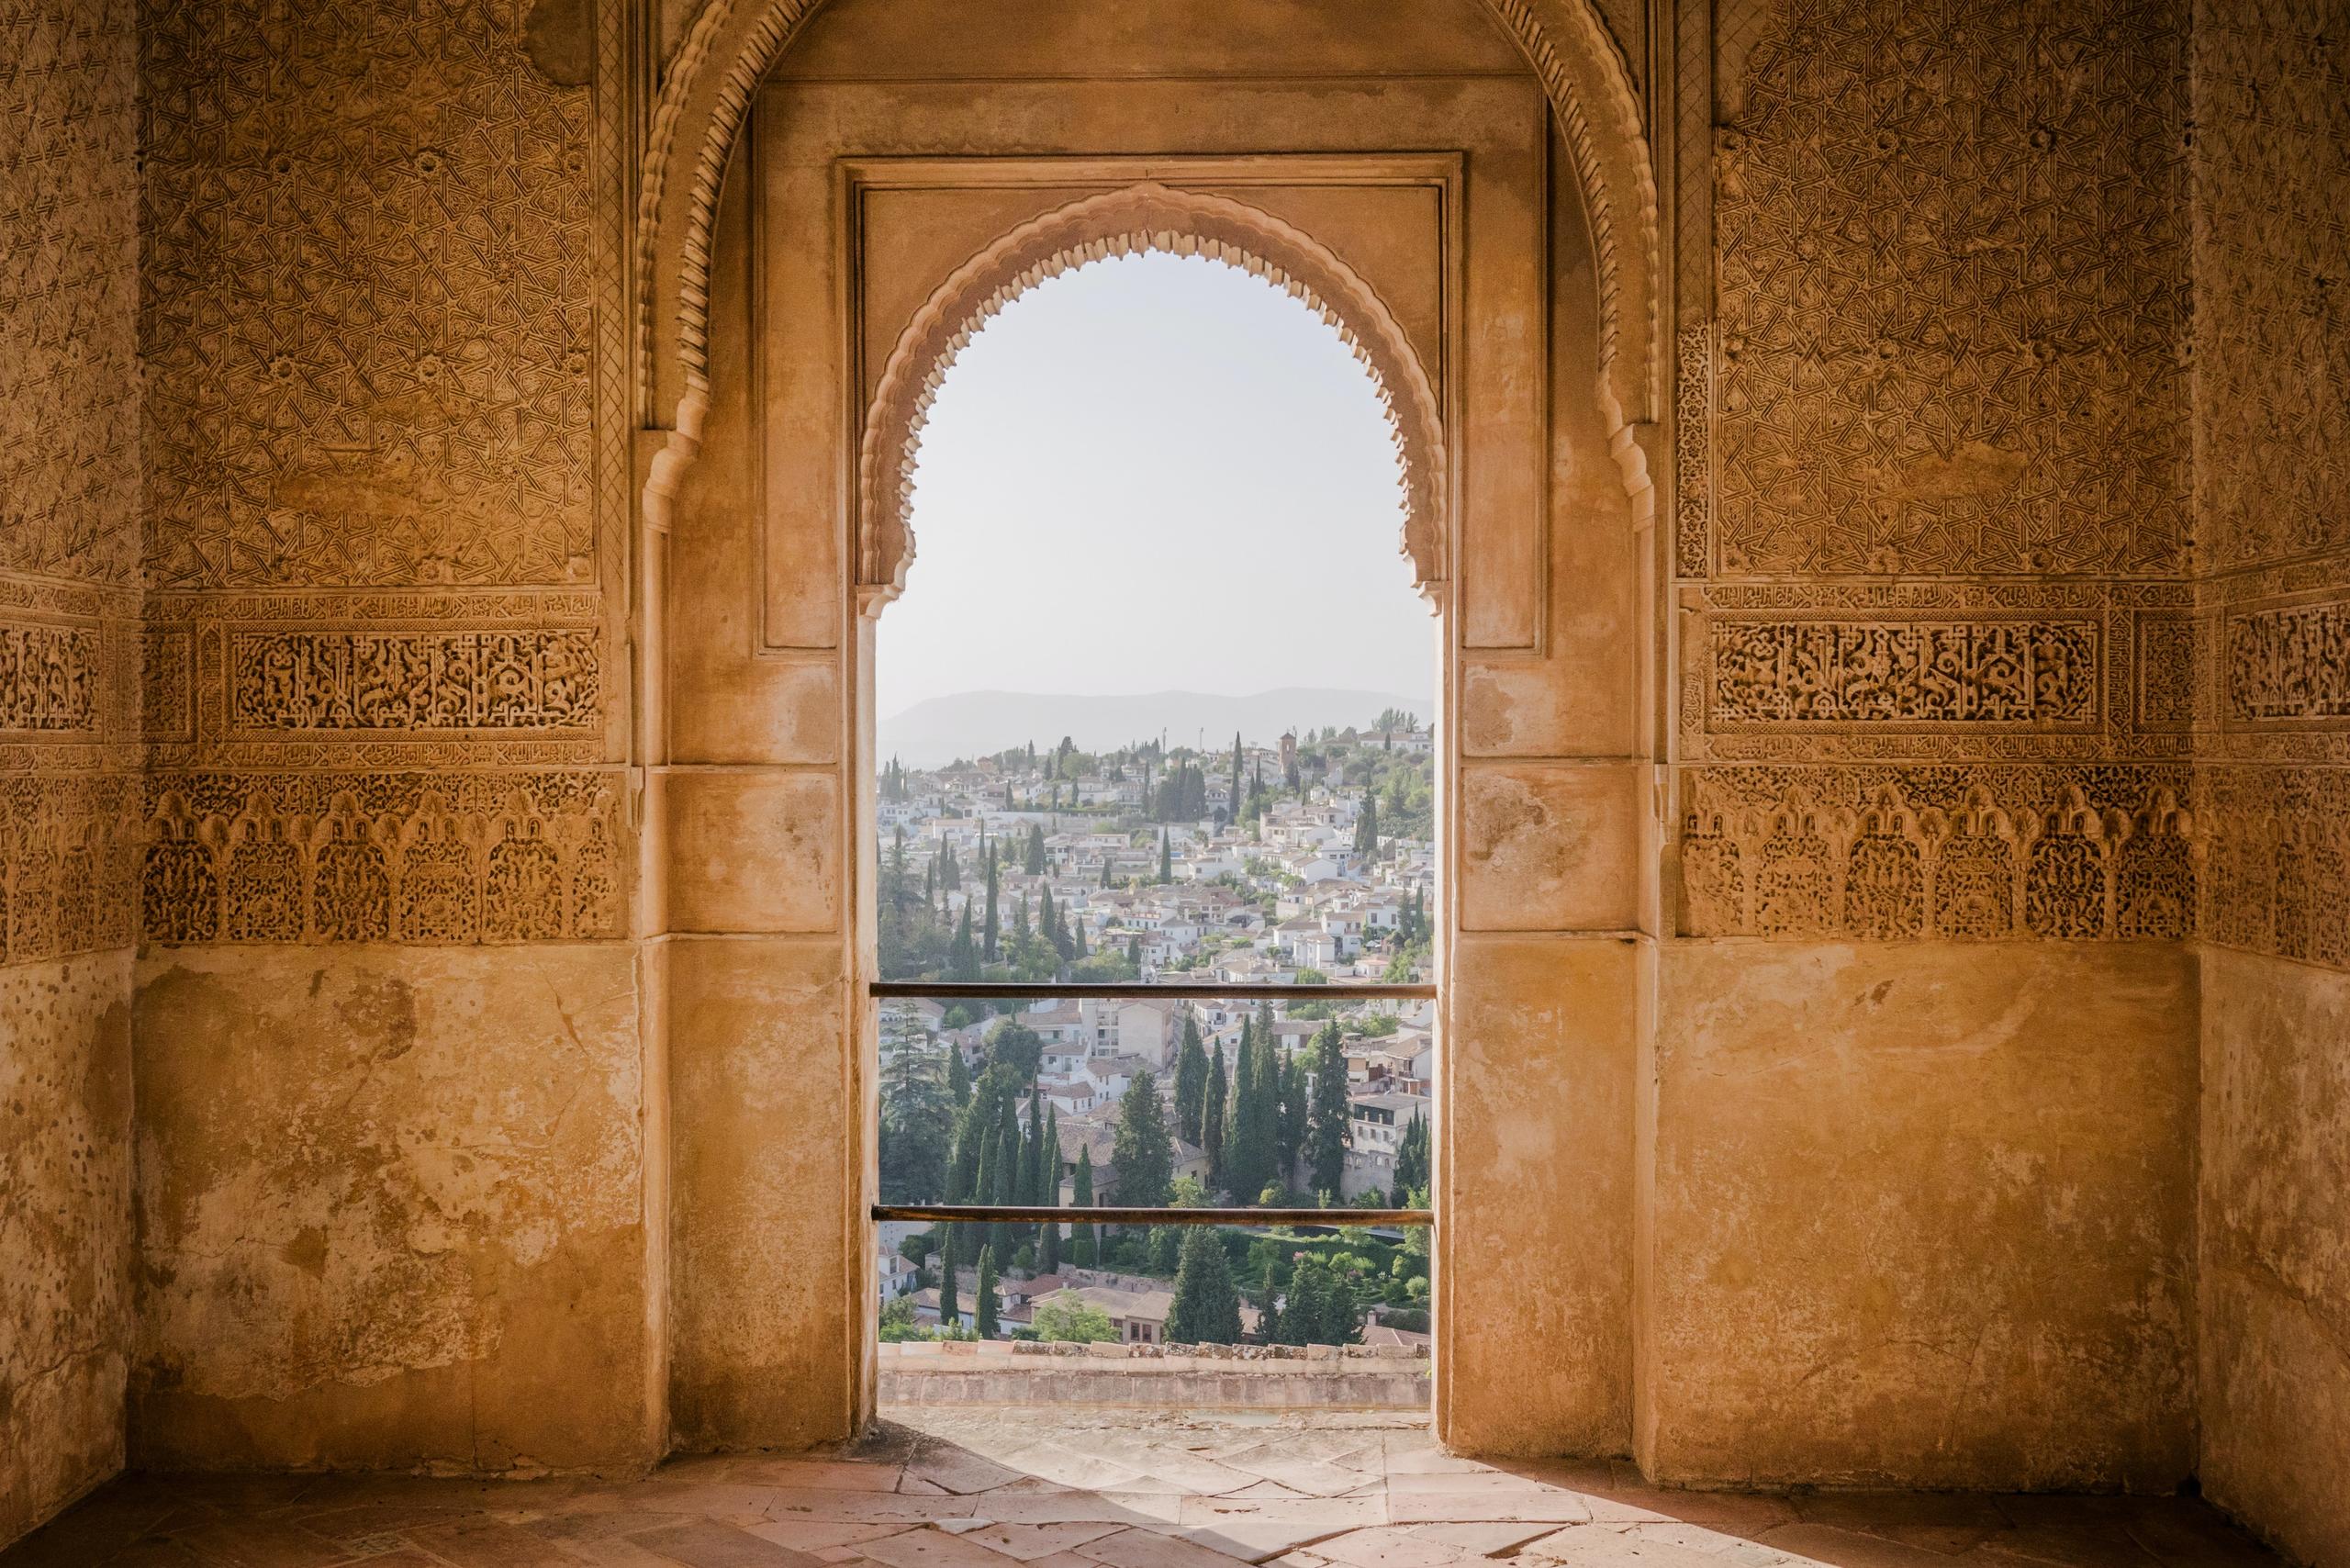 Entrance to the Alhambra with Tourist Audioguide - Accommodations in Granada